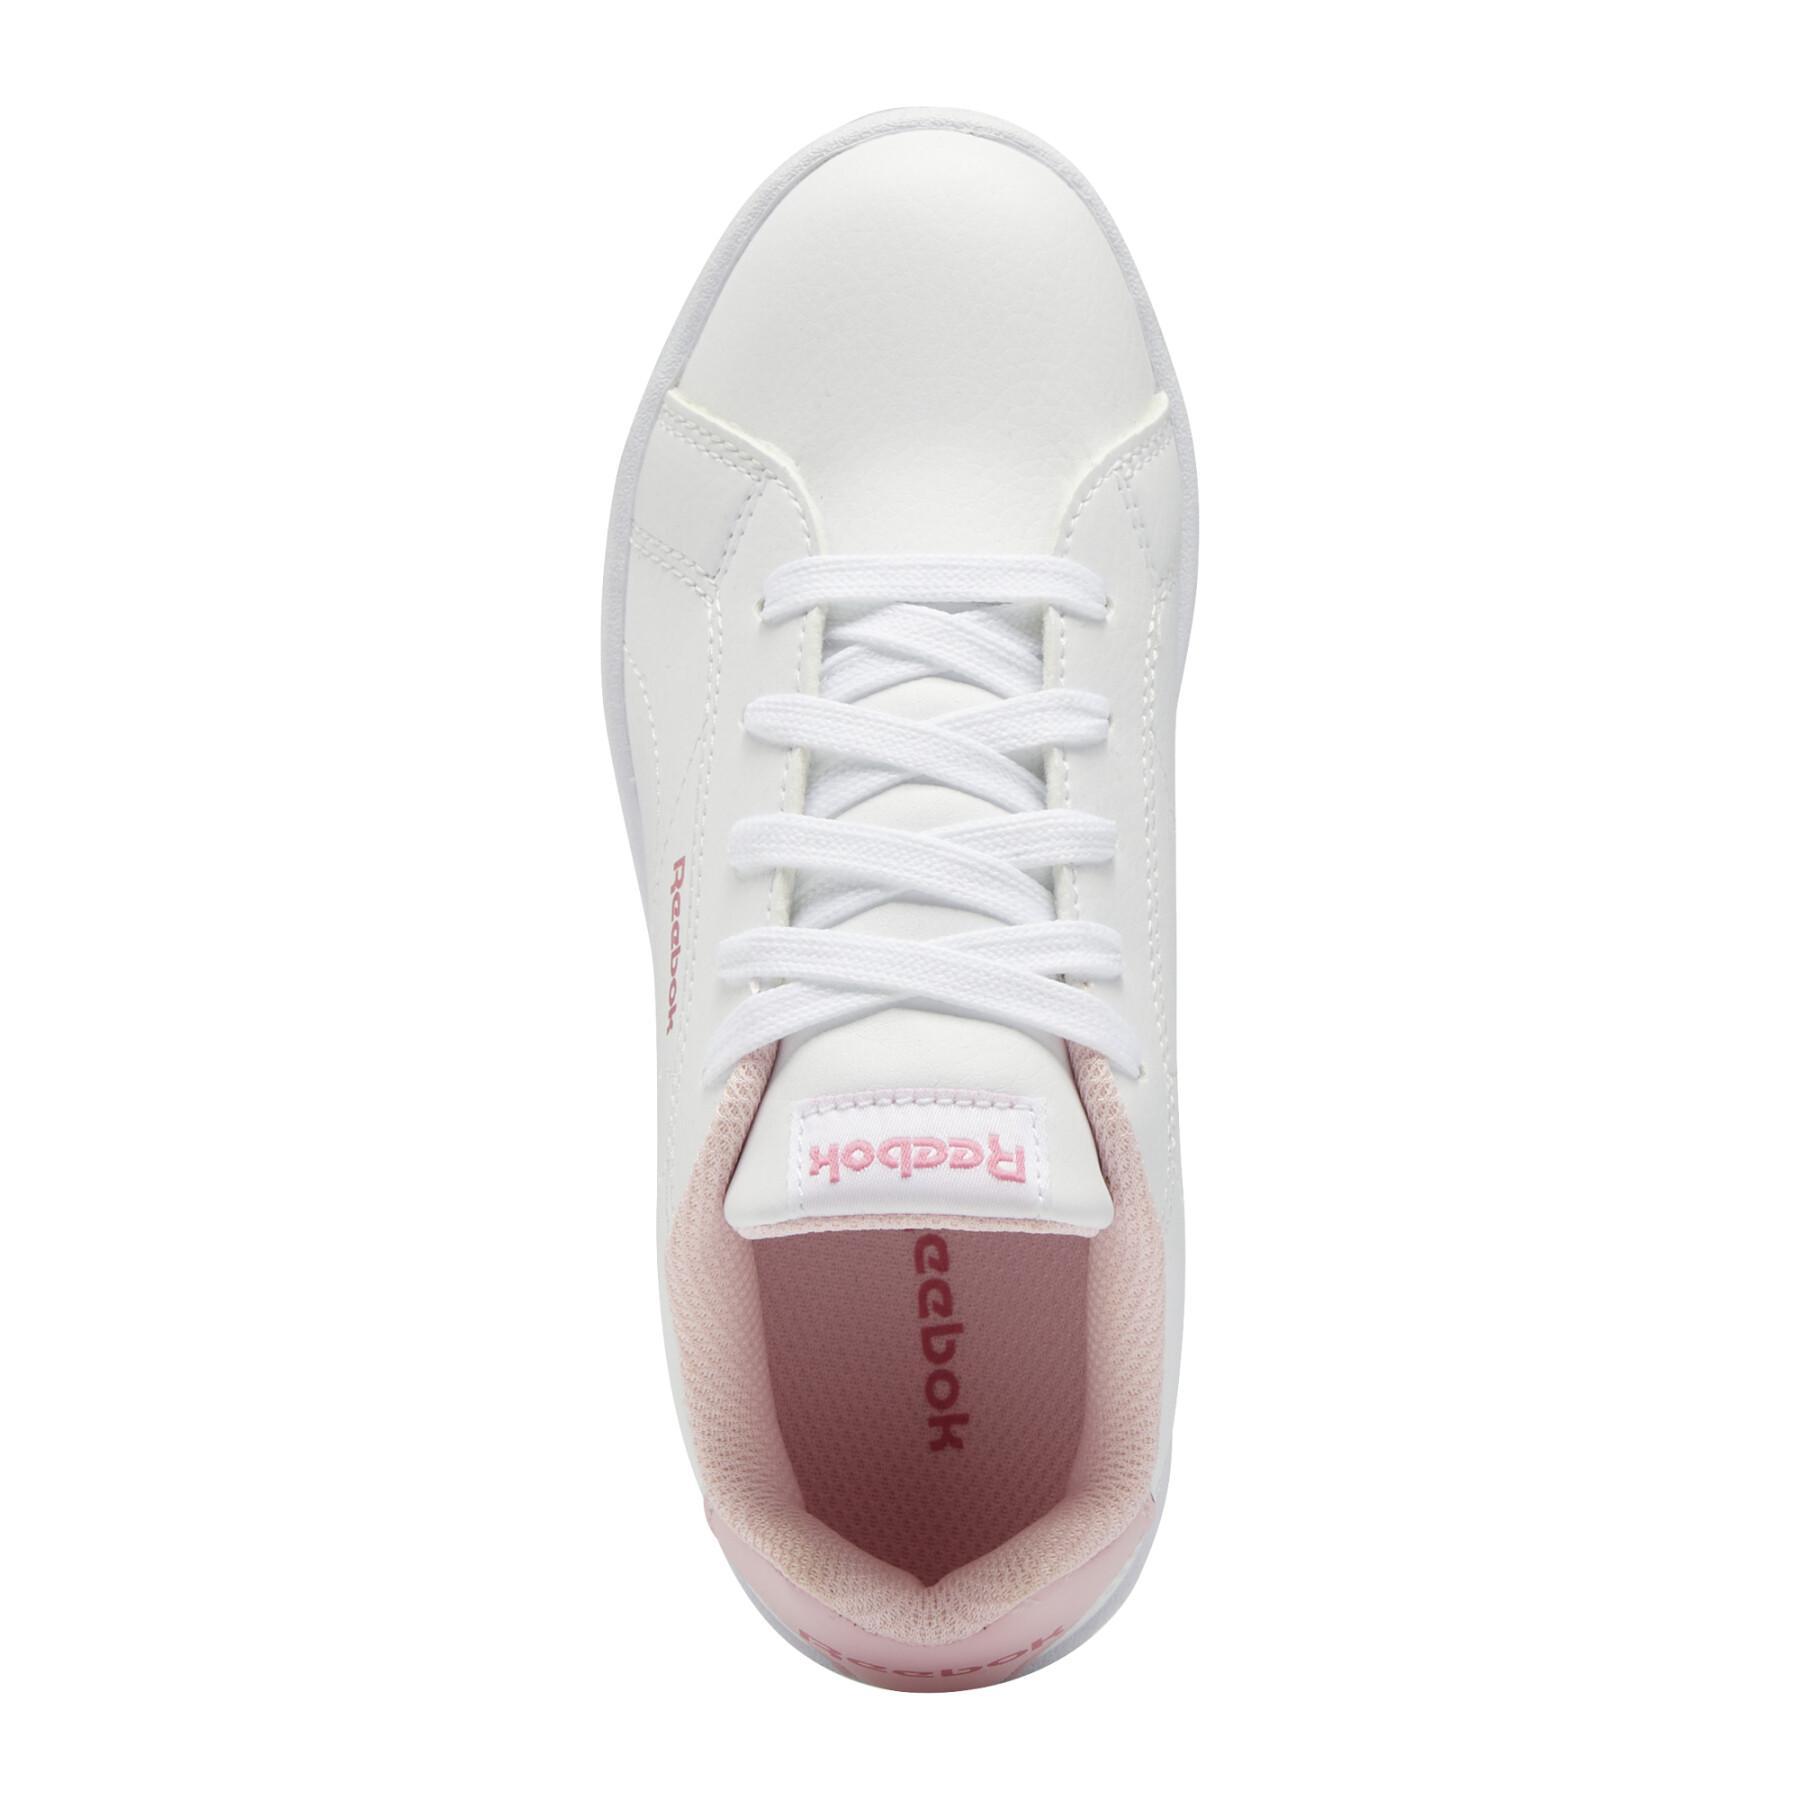 Girl's shoes Reebok royal complete cln 2